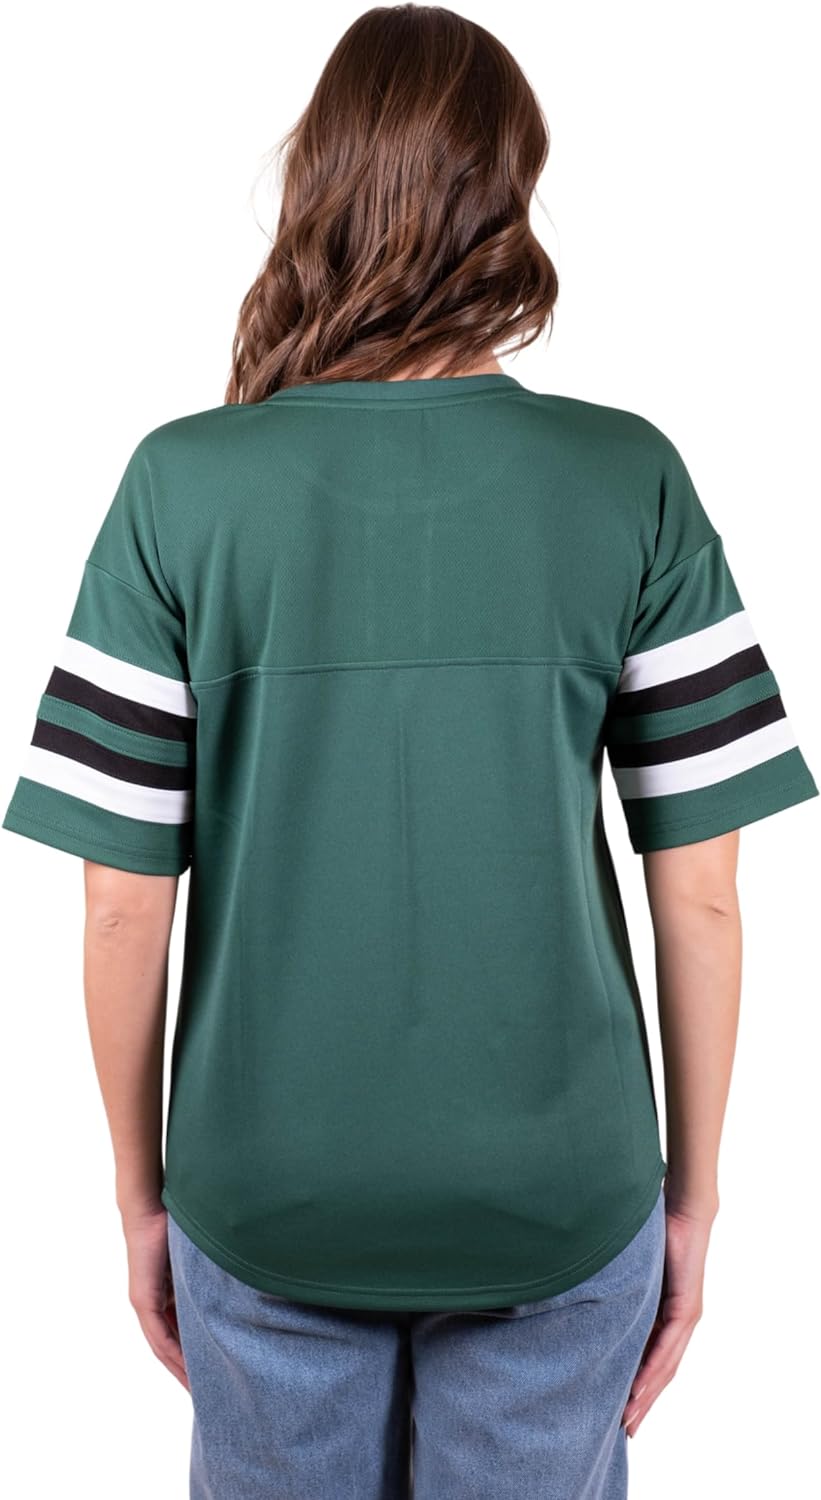 Ultra Game NFL New York Jets Womens Standard Lace Up Tee Shirt Penalty Box|New York Jets